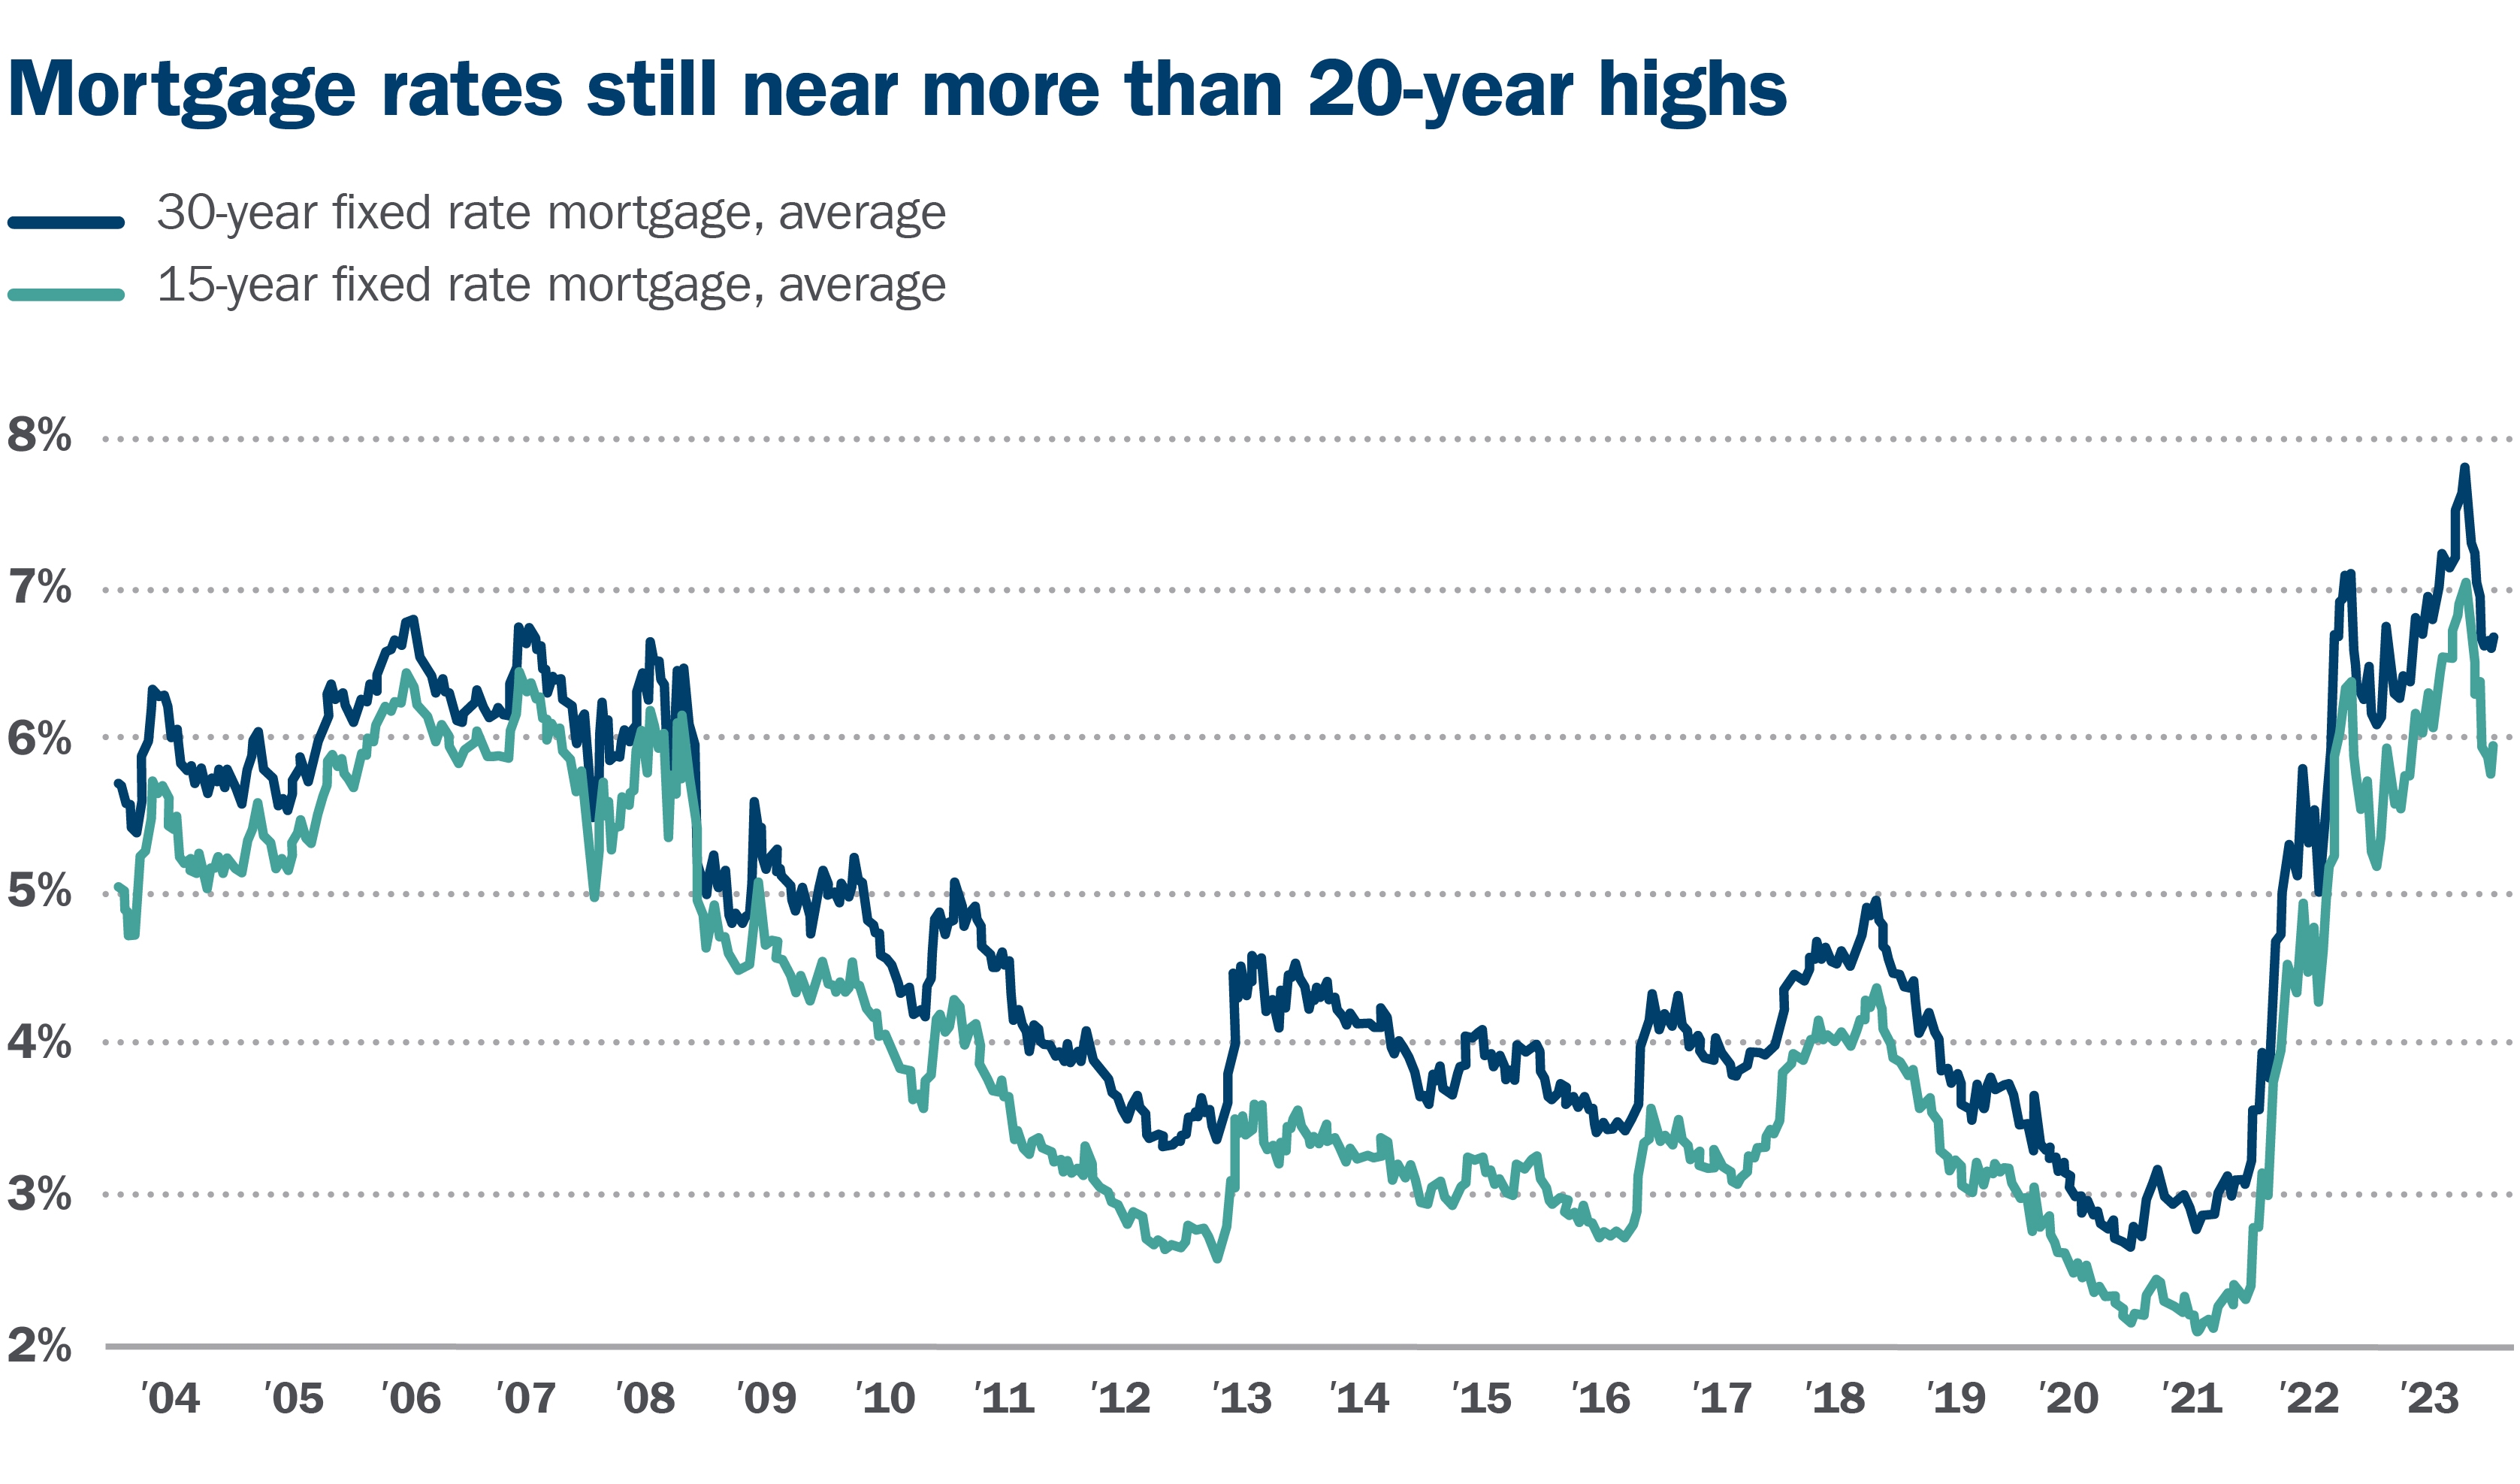 Mortgage rates still near more than 20-year highs